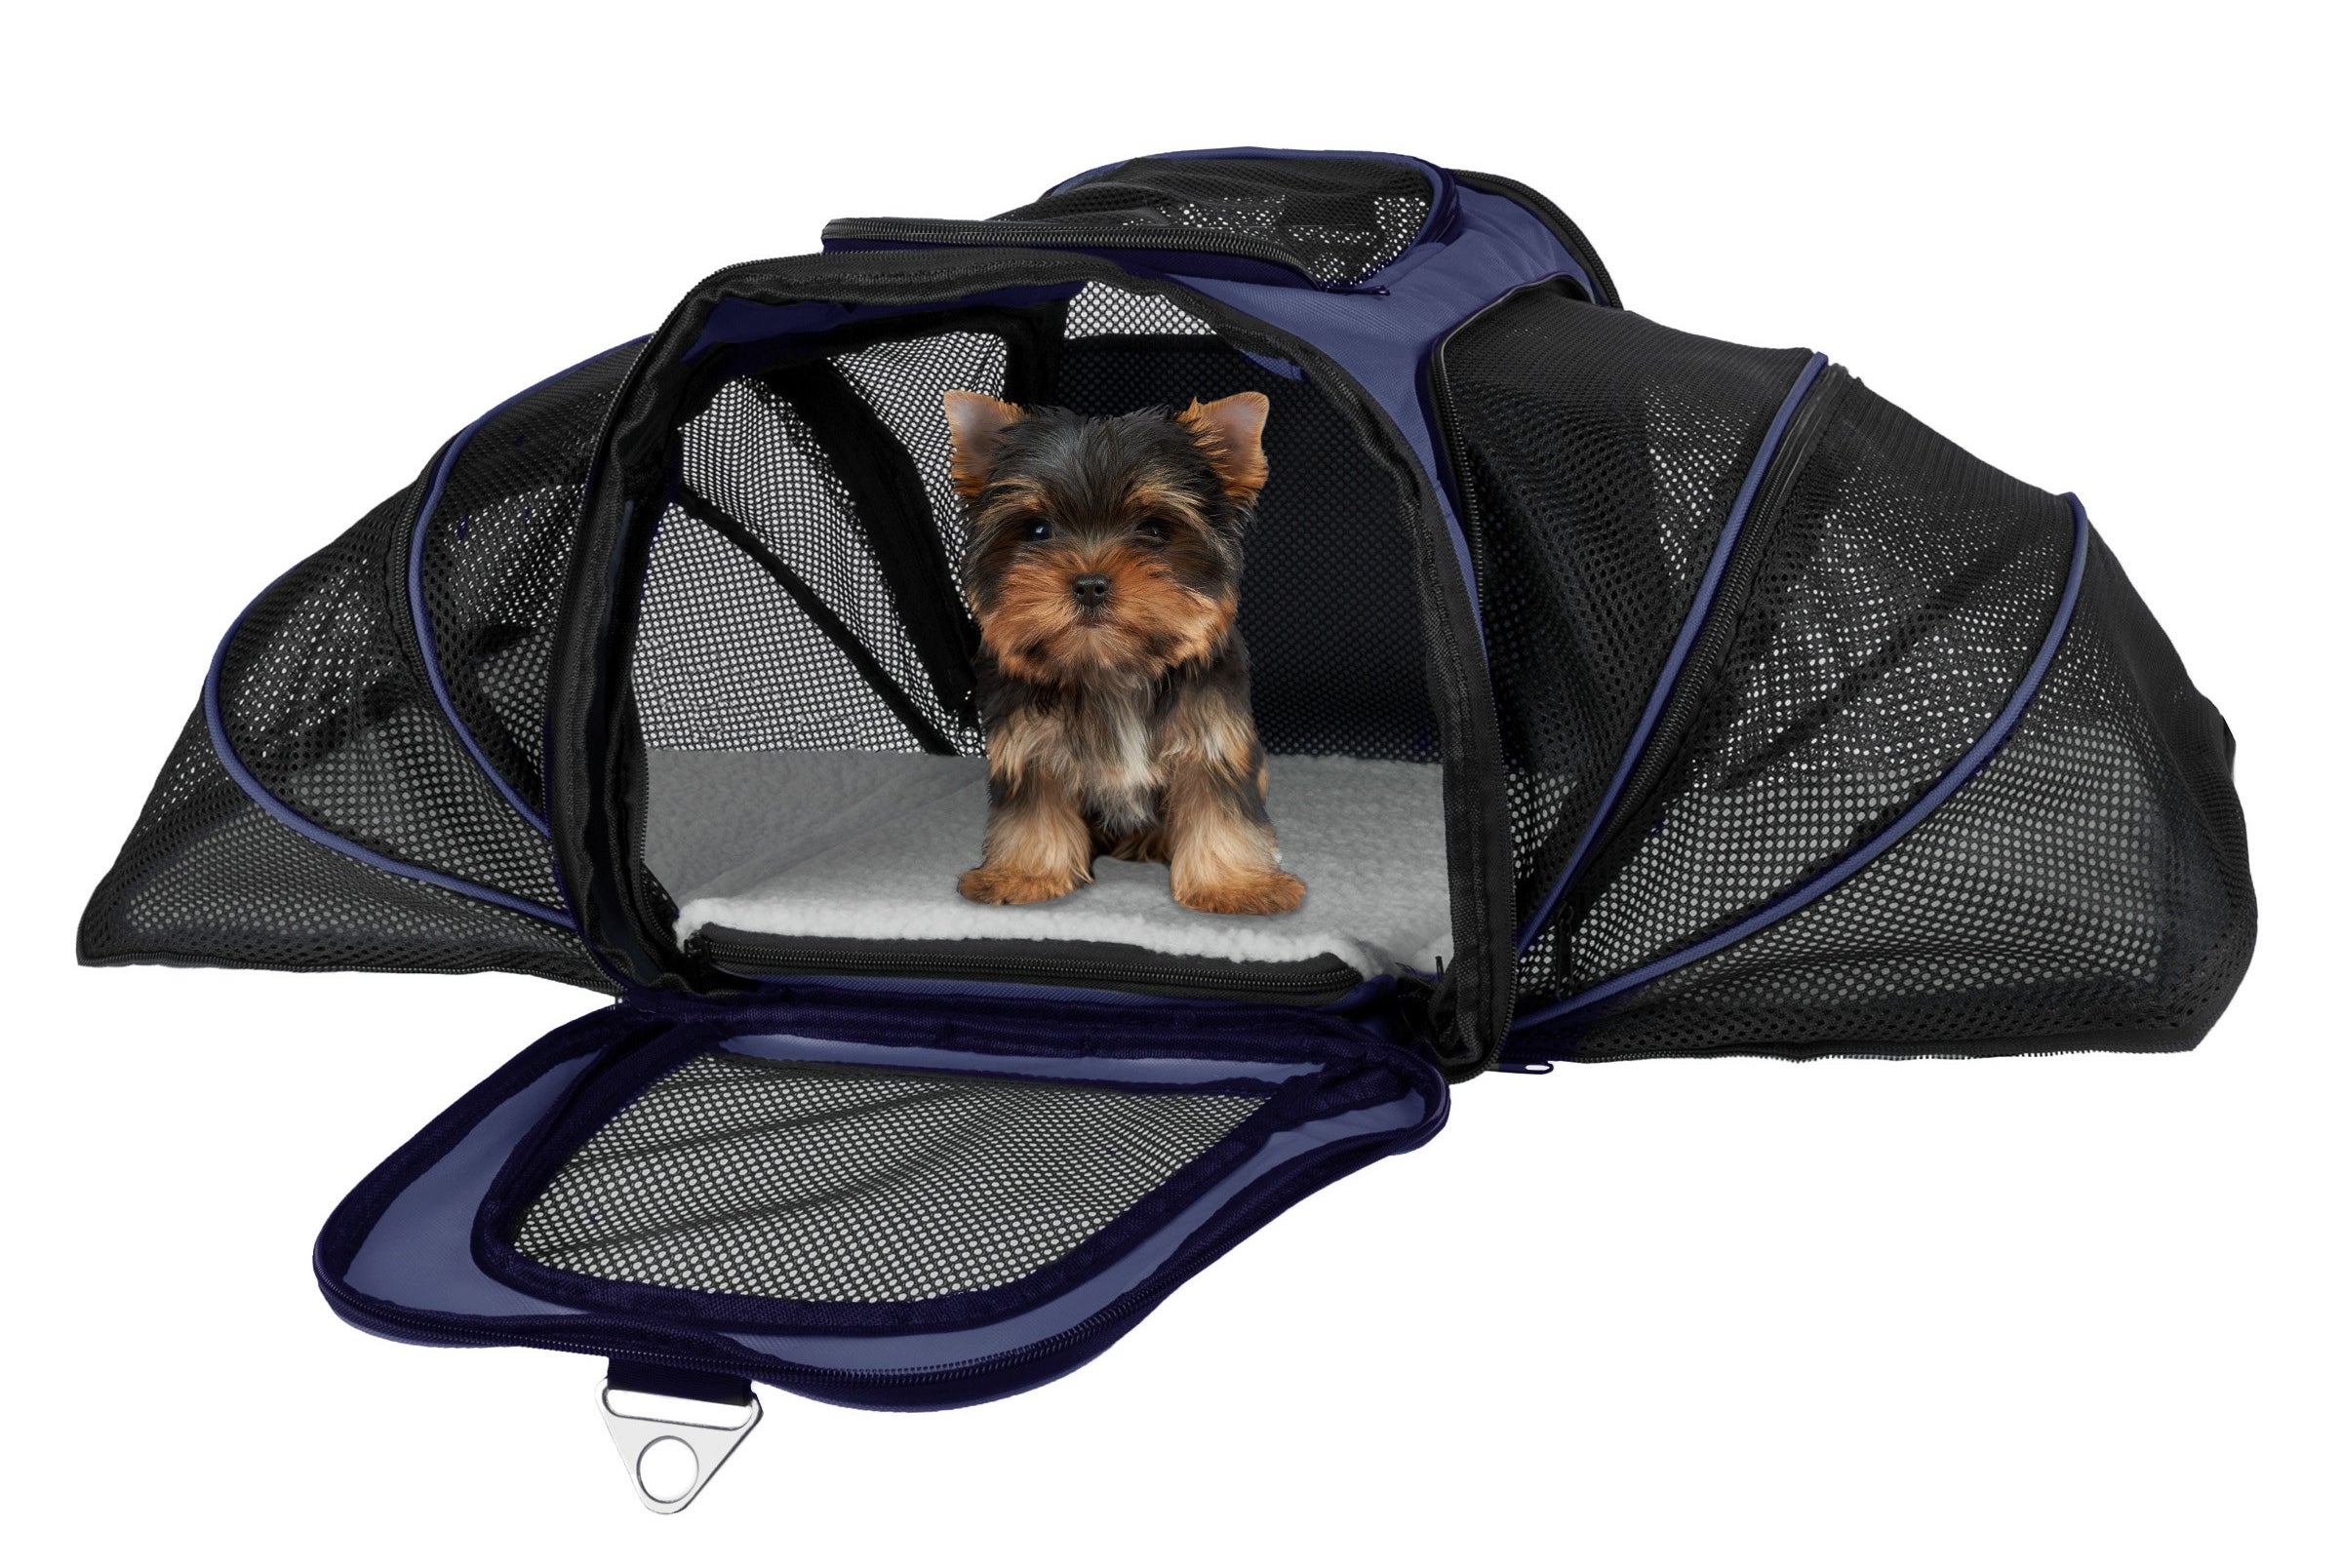 A Yorkie sitting in an expandable black and purple pet carrier